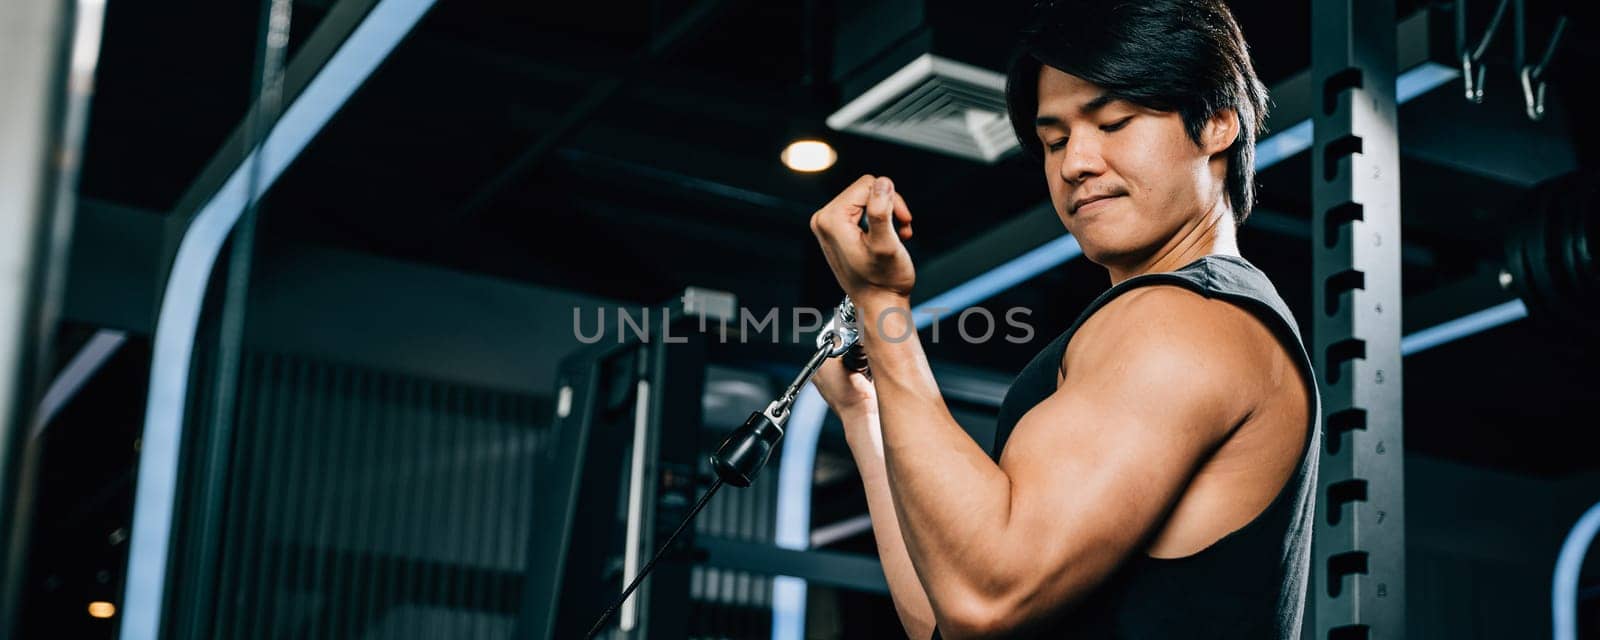 Concept of fitness and exercise - a muscular male athlete pulling a cable tricep rope during a strength training session. lifestyle and people concept